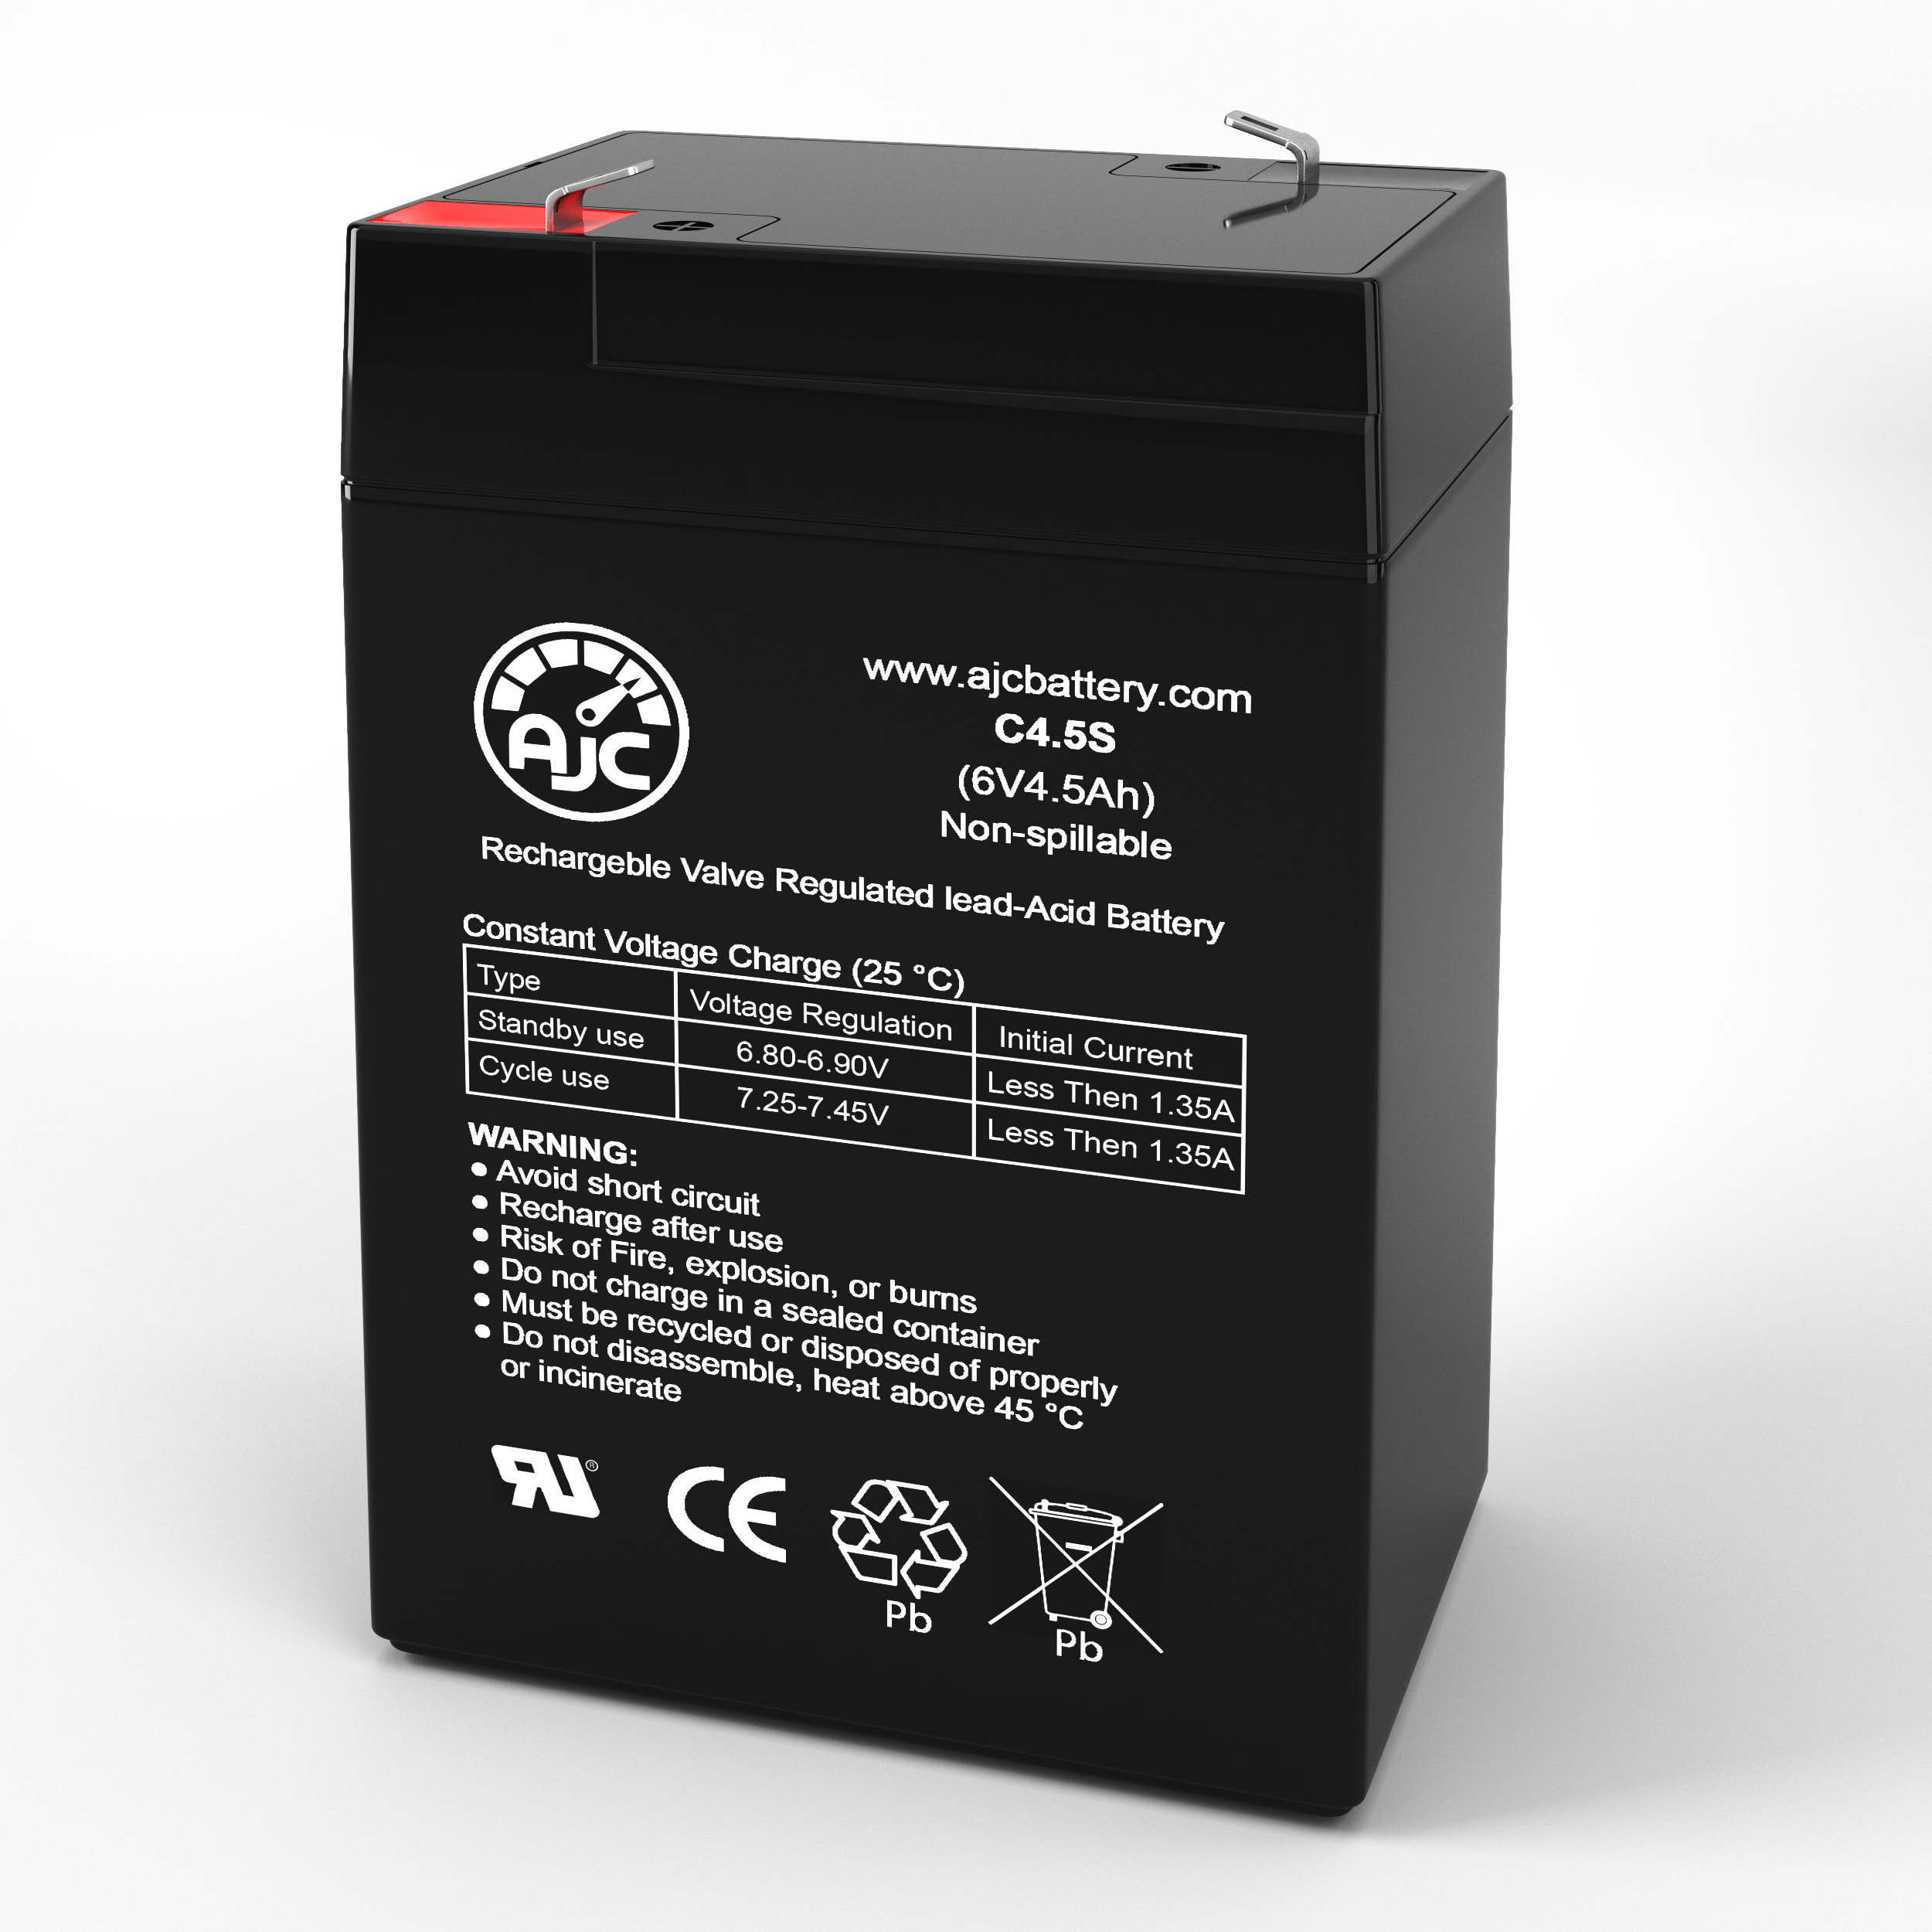 This is an AJC Brand Replacement Astralite EU-MR 6V 4.5Ah Emergency Light Battery